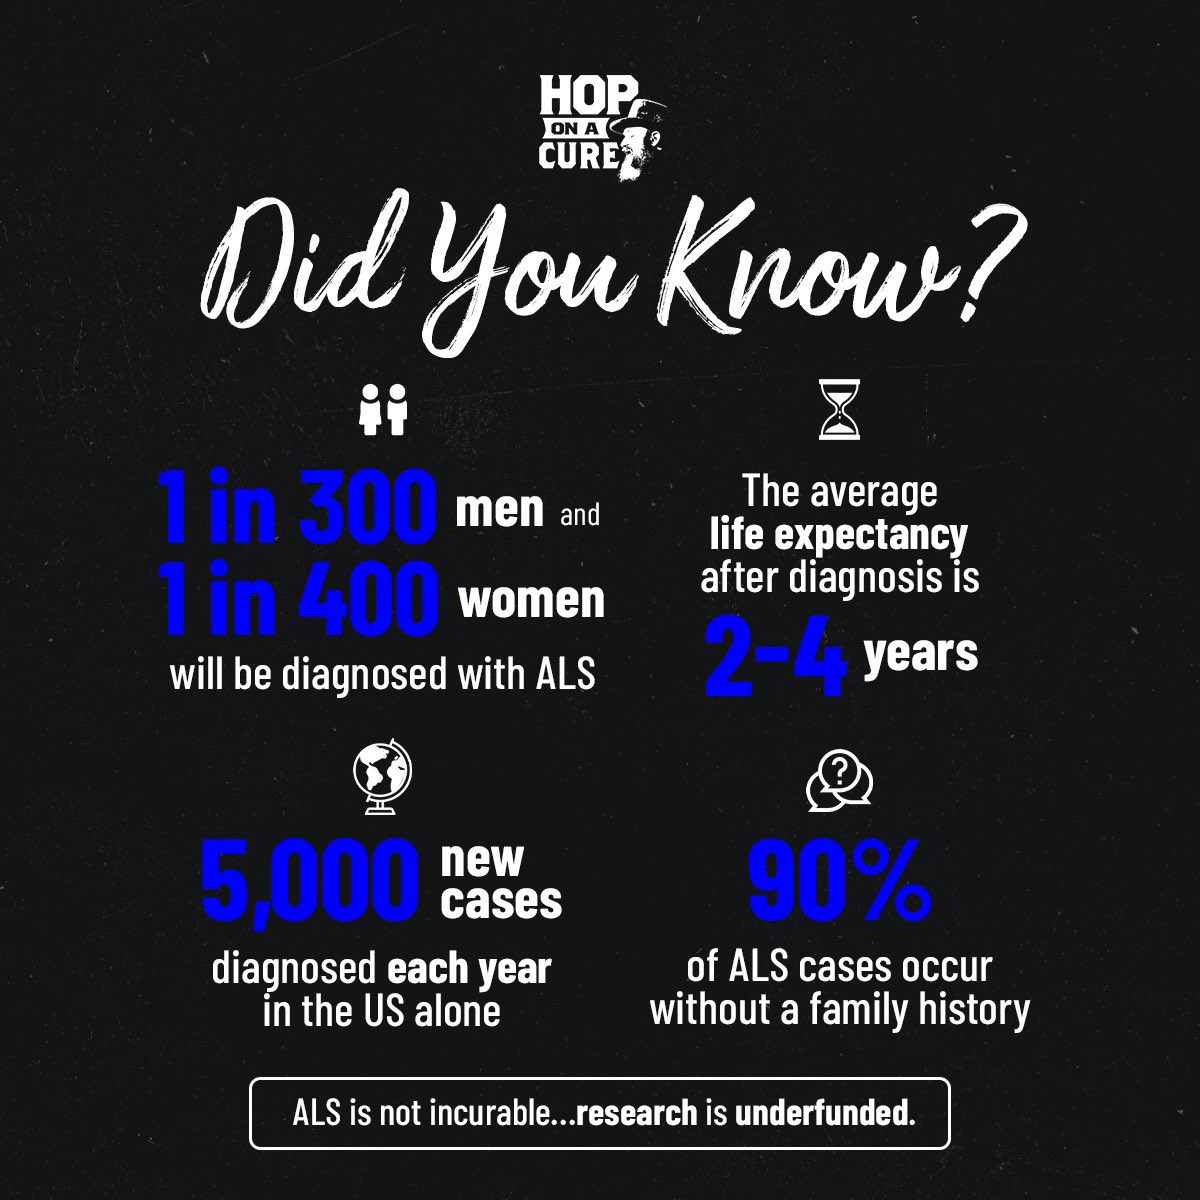 Did you know these #ALSfacts? Share this post with someone who might not know!

Visit hoponacure.org to learn more about ALS and how you can get involved in finding a cure. #hoponacure #cureALS #believeinacure💙